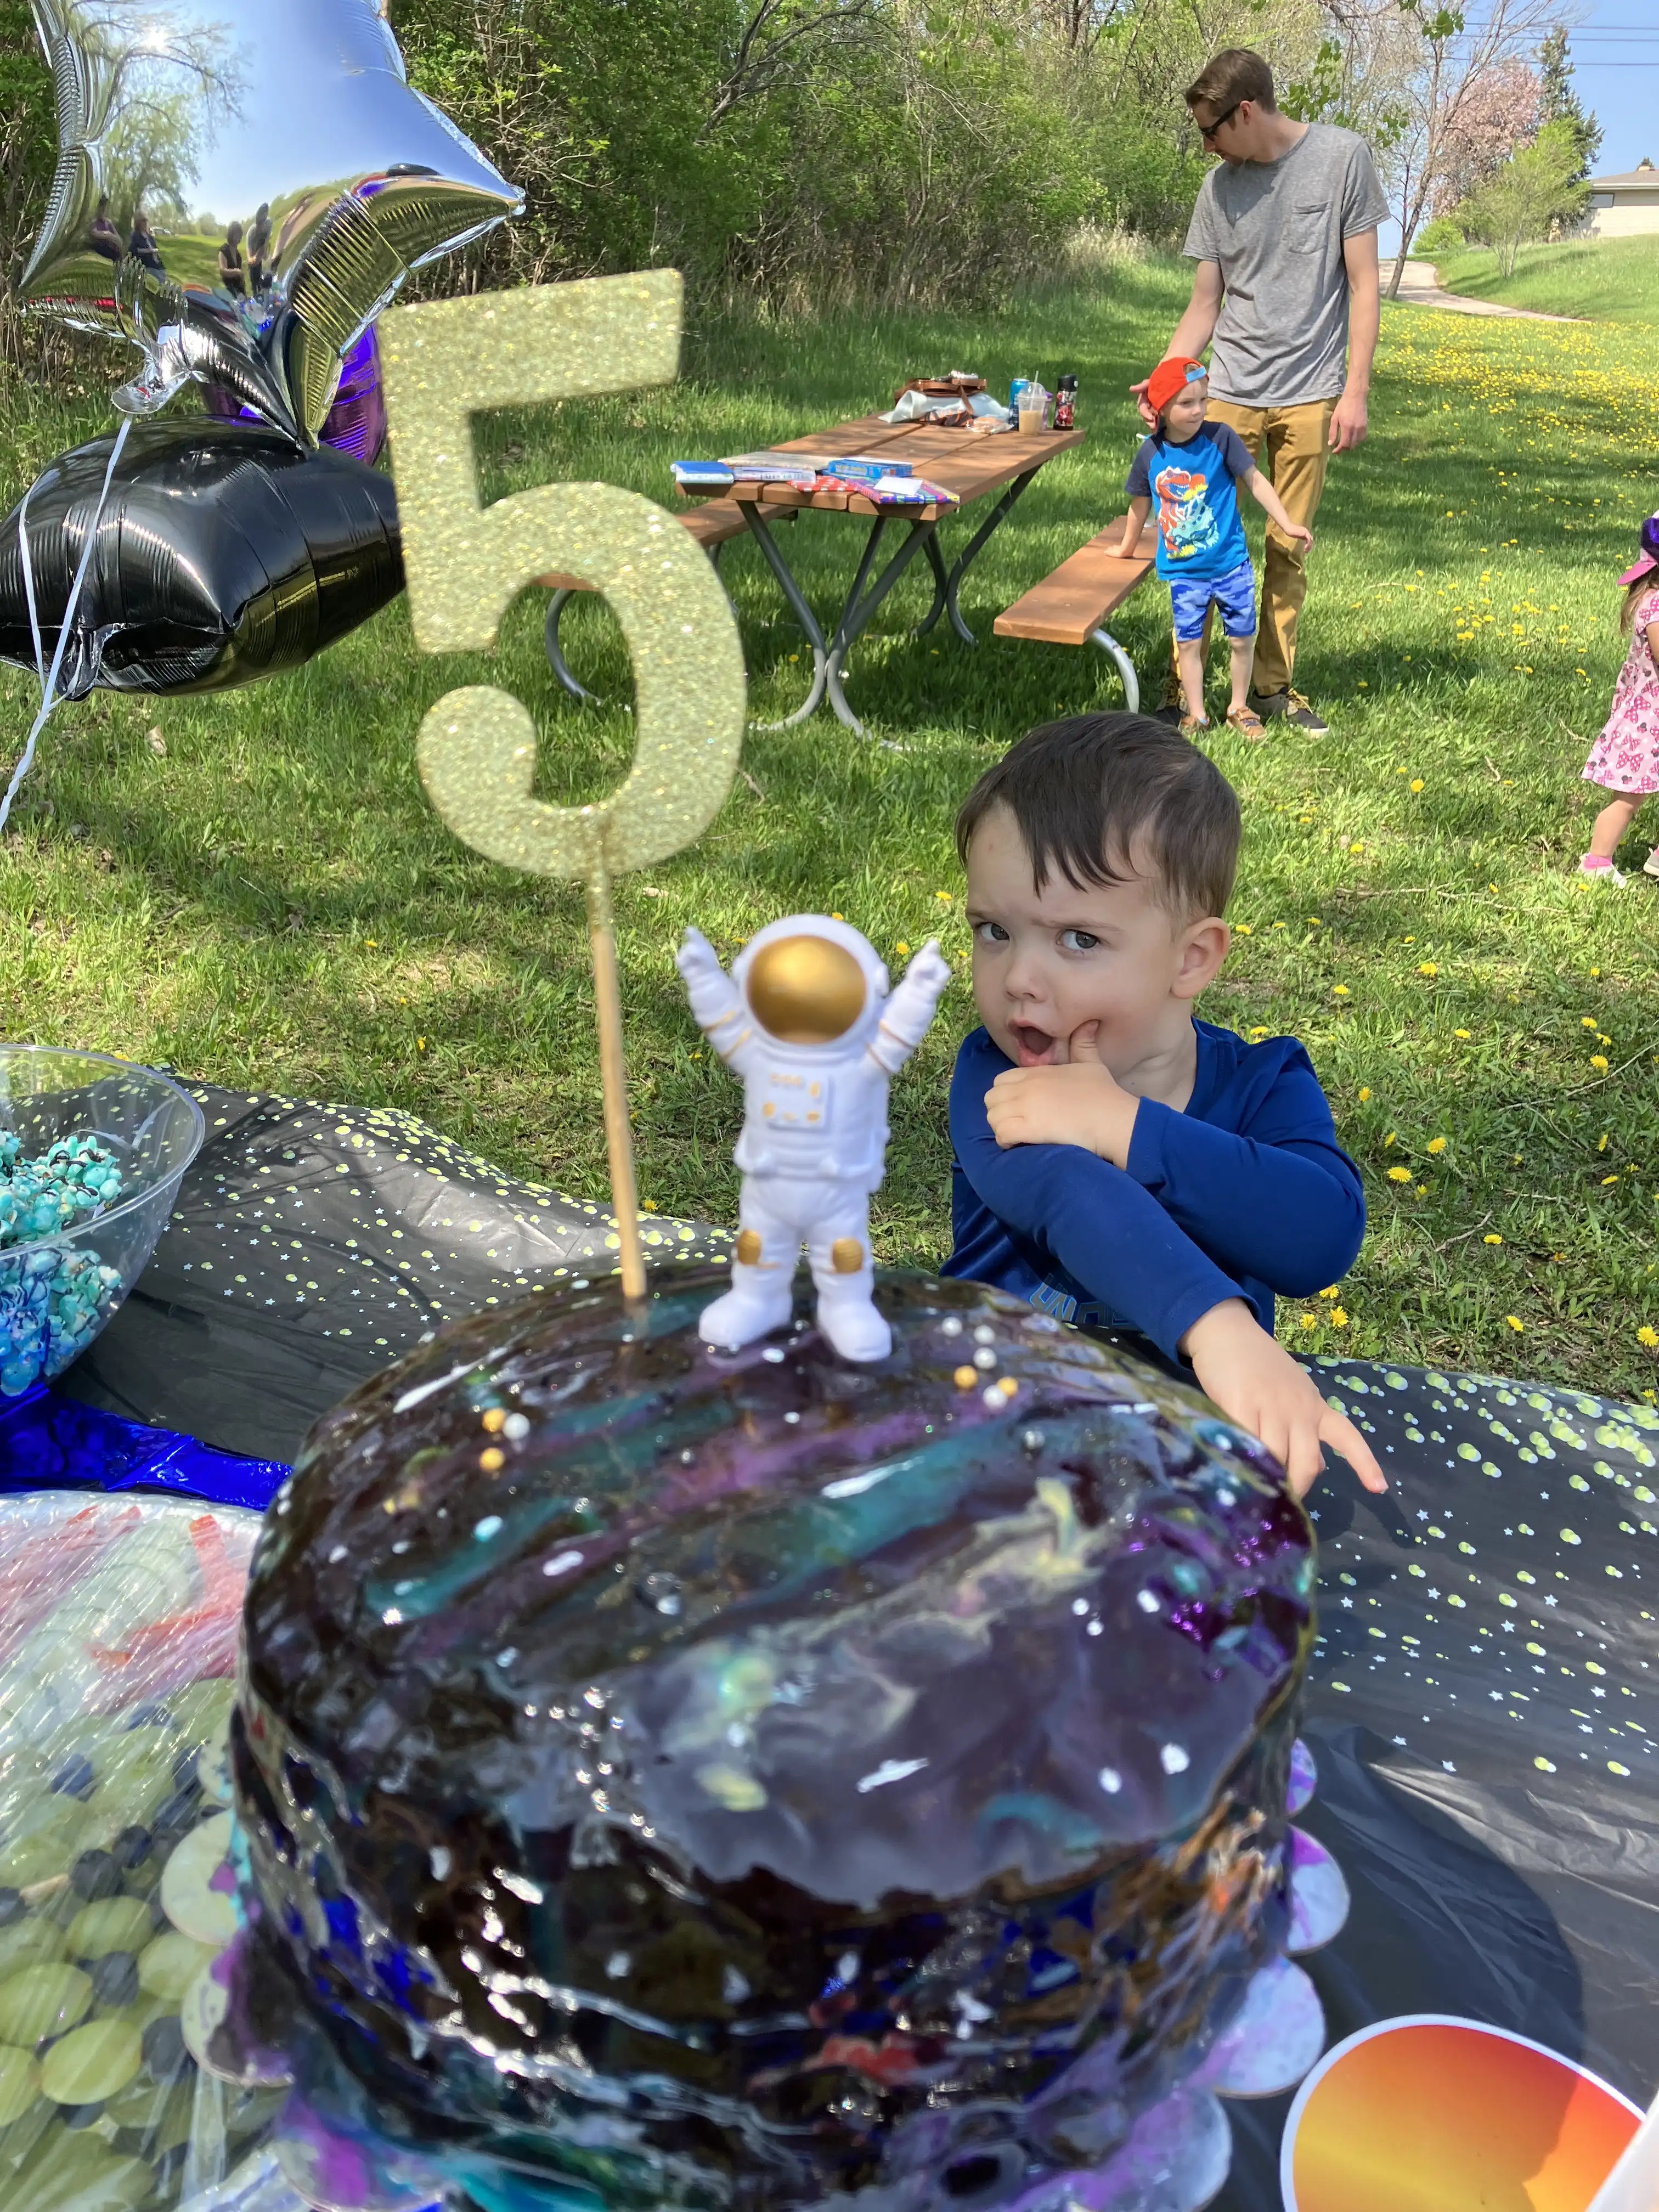 Graham's birthday cake with a golden five and an astronaut on top, with Royal in the background making a funny face.